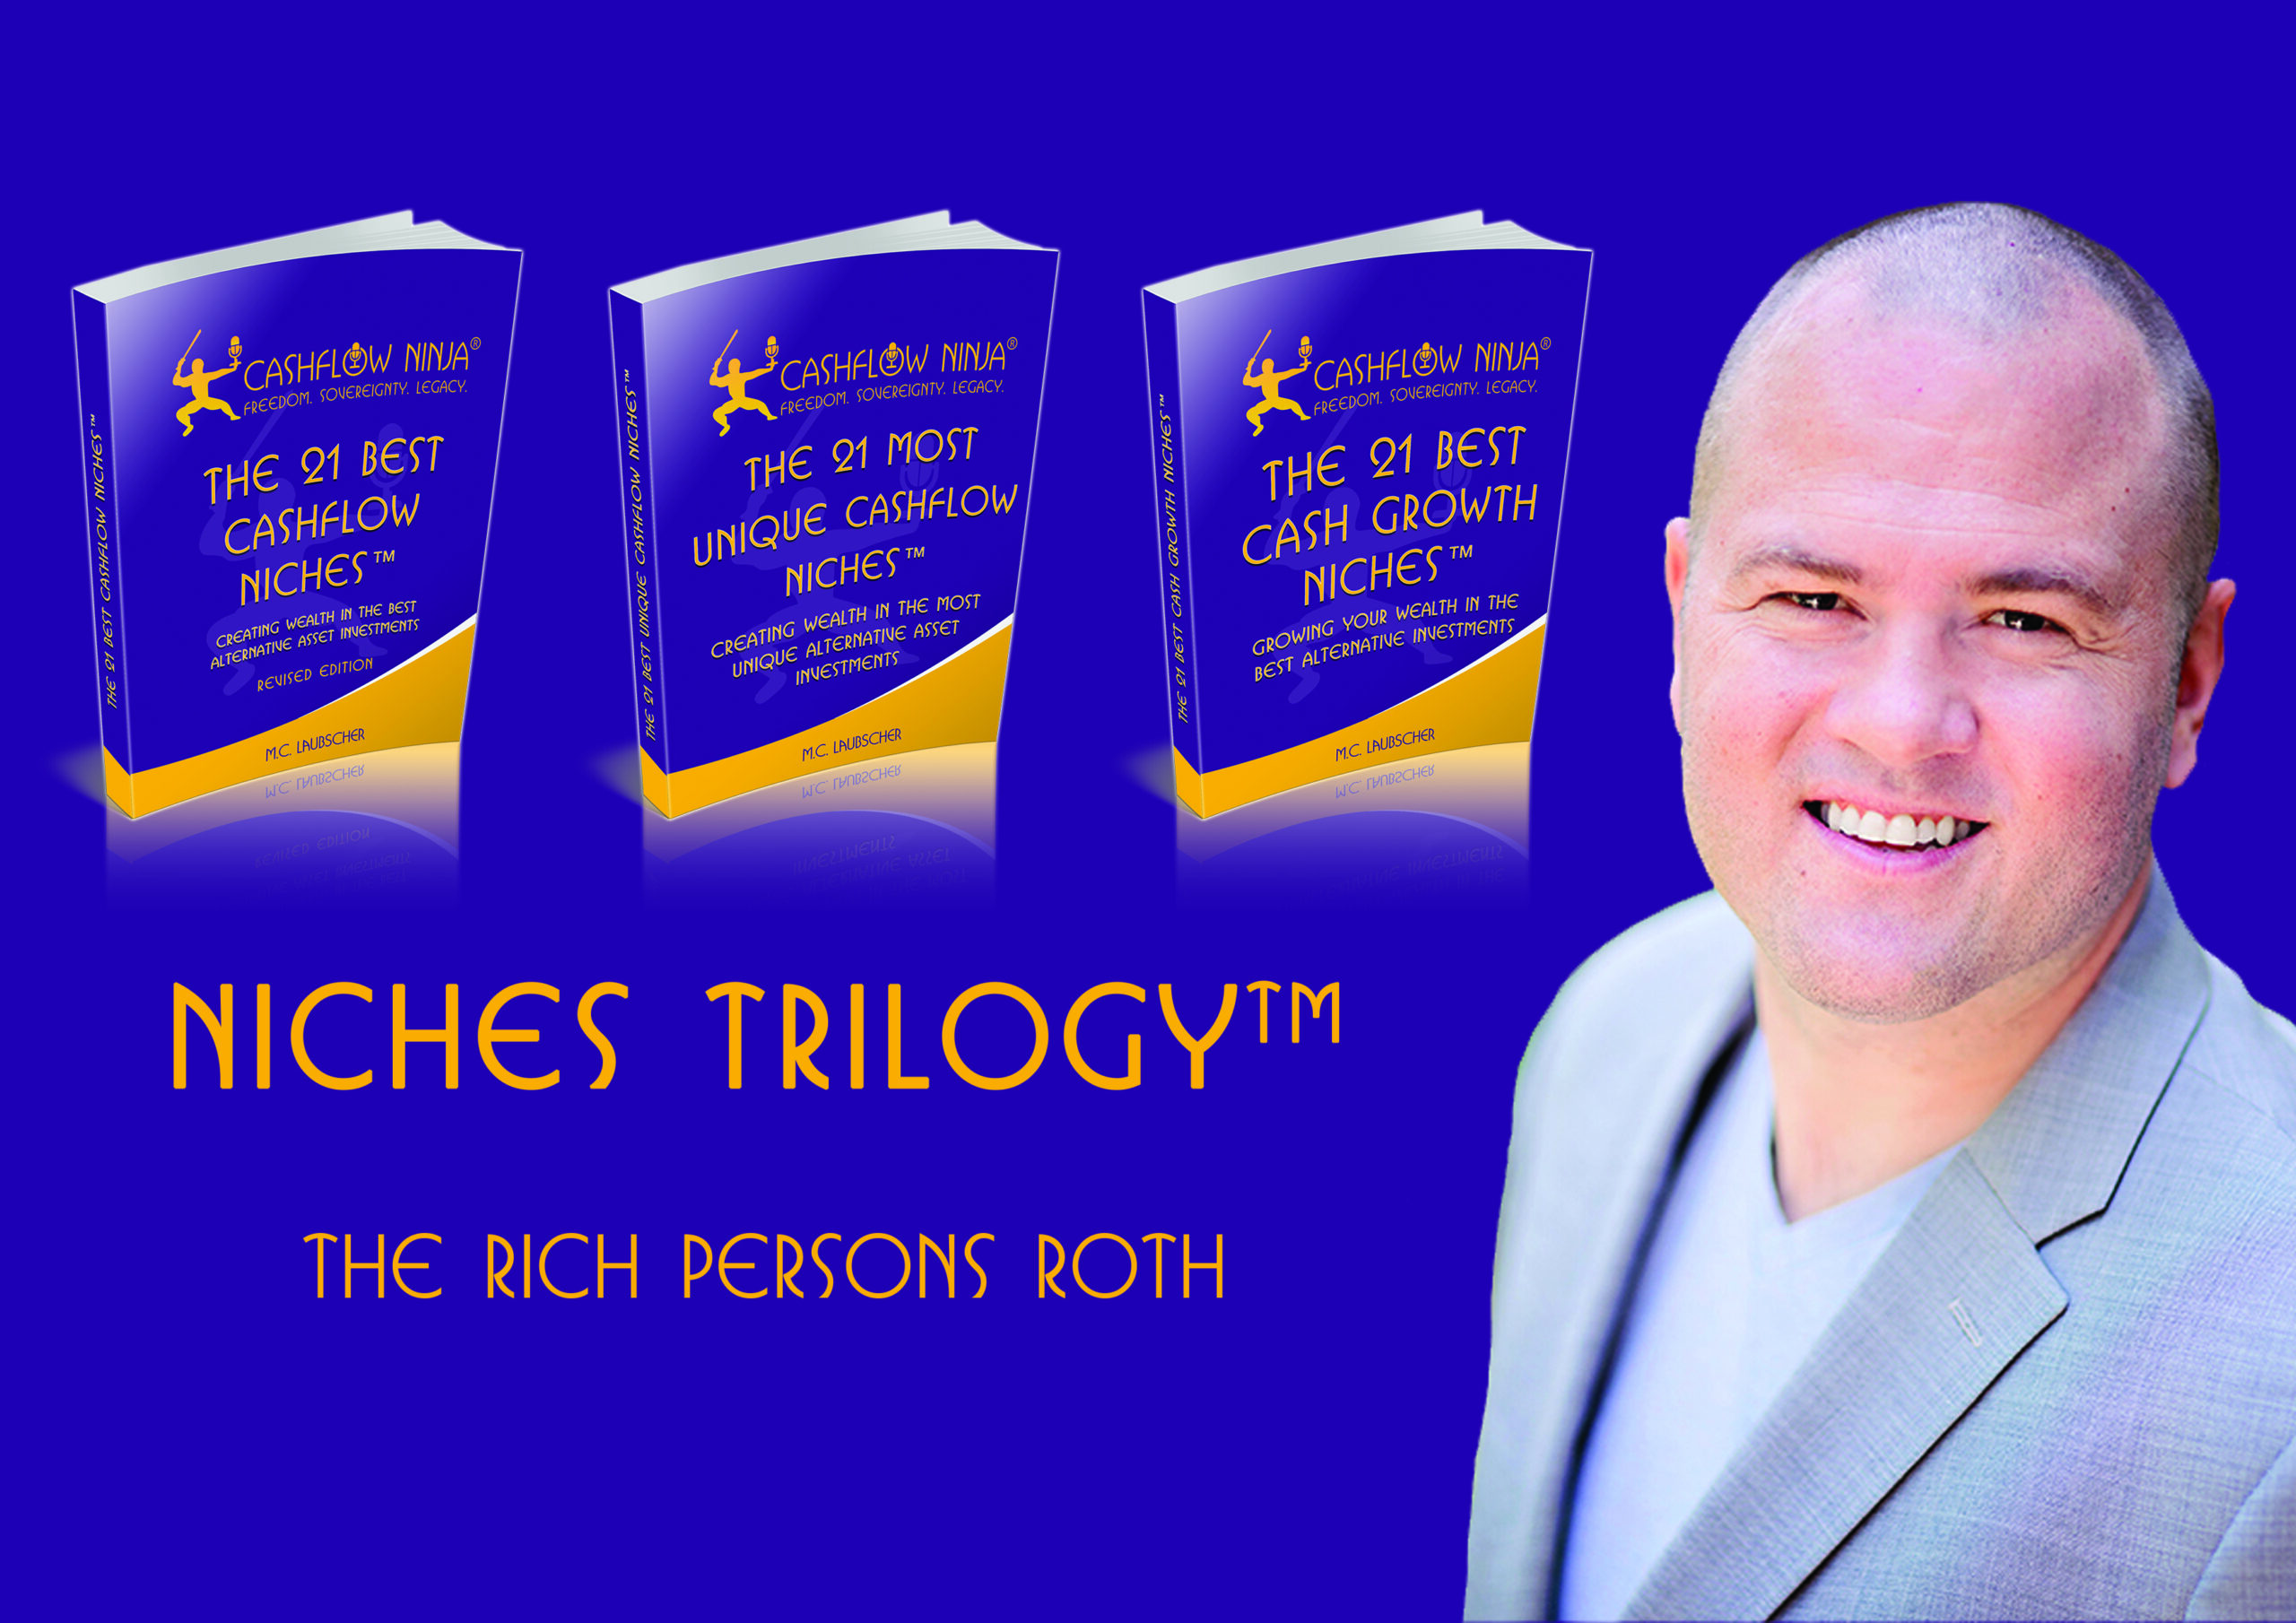 niches trilogy - How To Invest